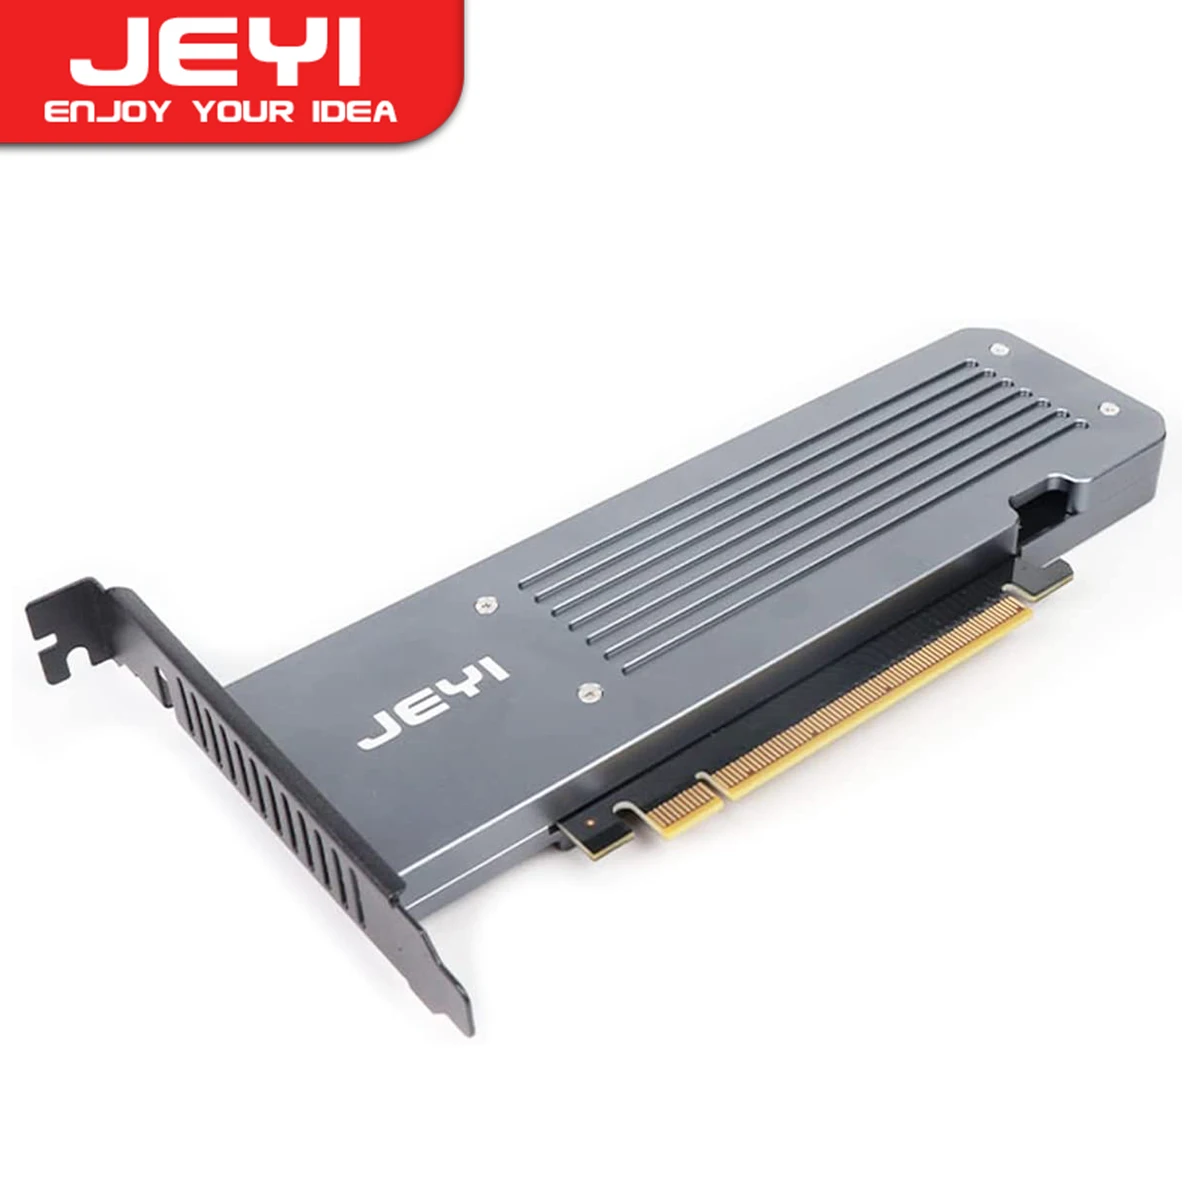 JEYI M.2 X16 PCIe 4.0 X4 Expansion Card with Heatsink, Supports 4 NVMe M.2 2280 up to 256Gbps, Support Bifurcation Raid